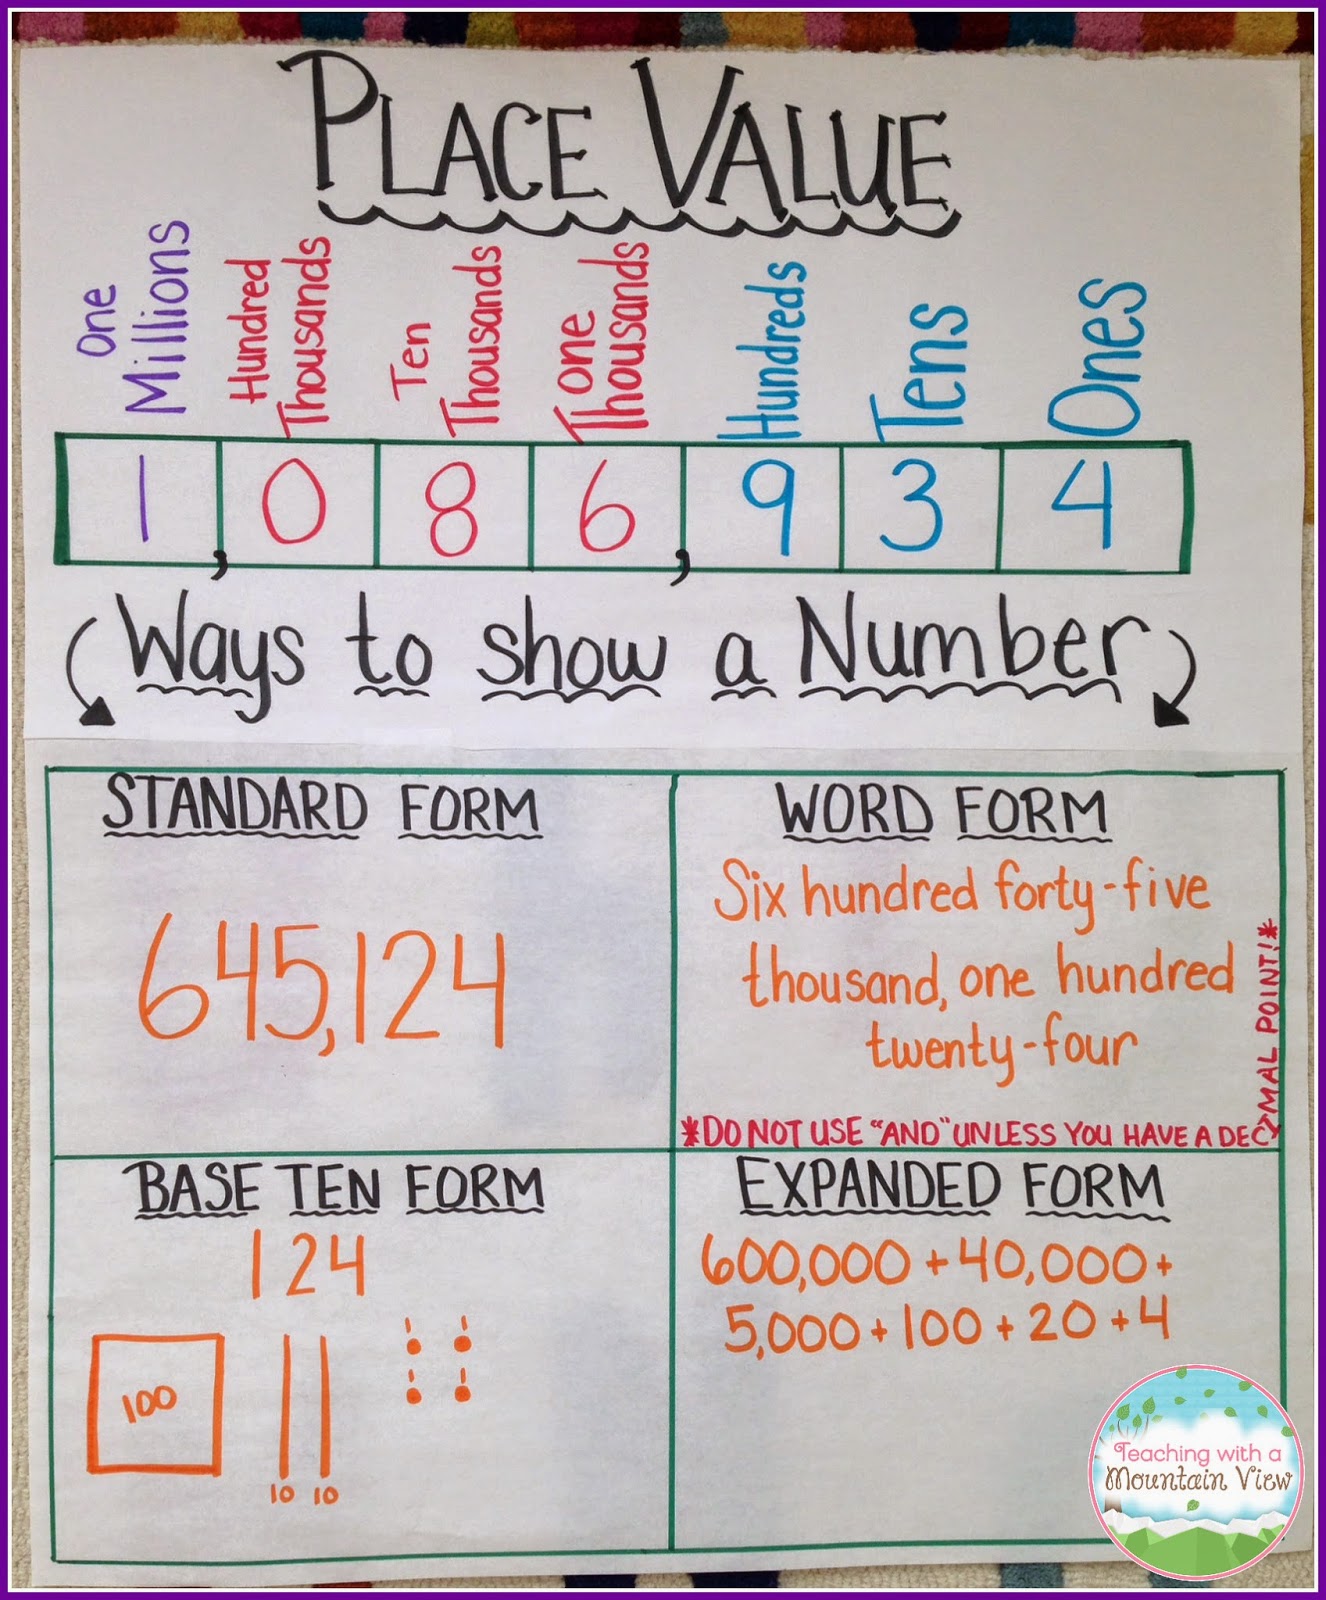 Building Place Value Understanding in the 29rd Grade Classroom